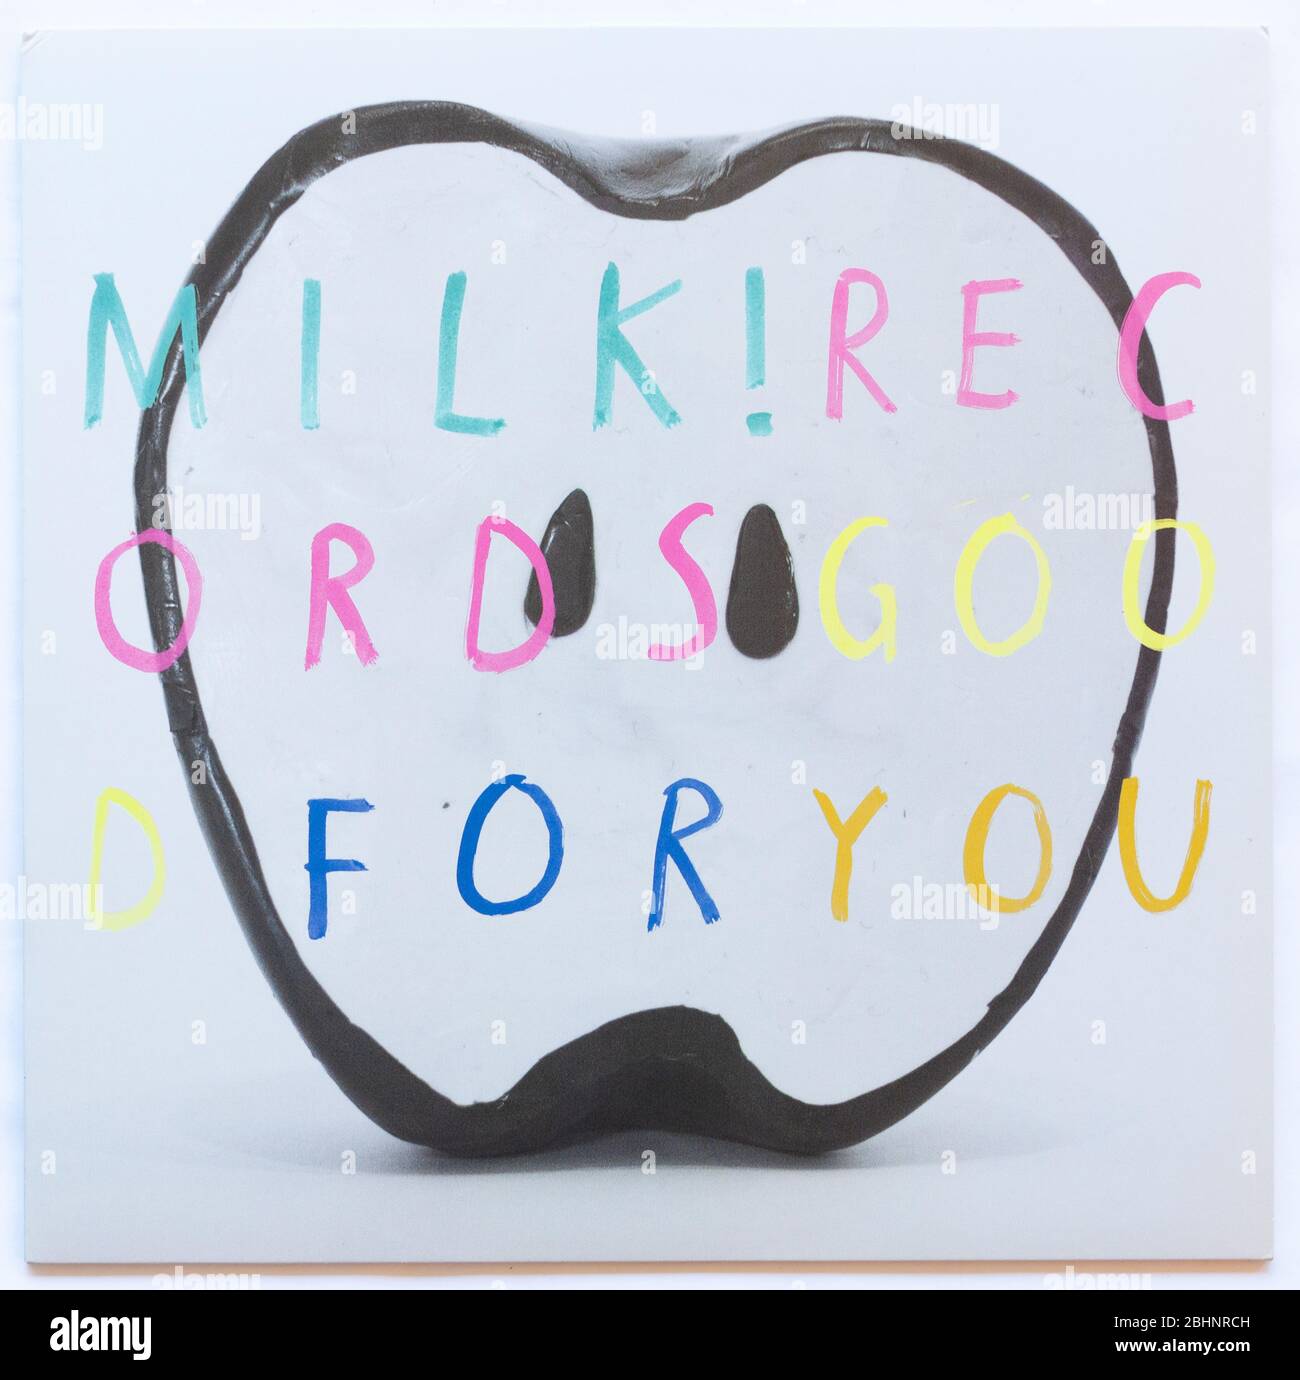 The cover of Good For You compilation album on independent label, Milk Records - Editorial use only Stock Photo